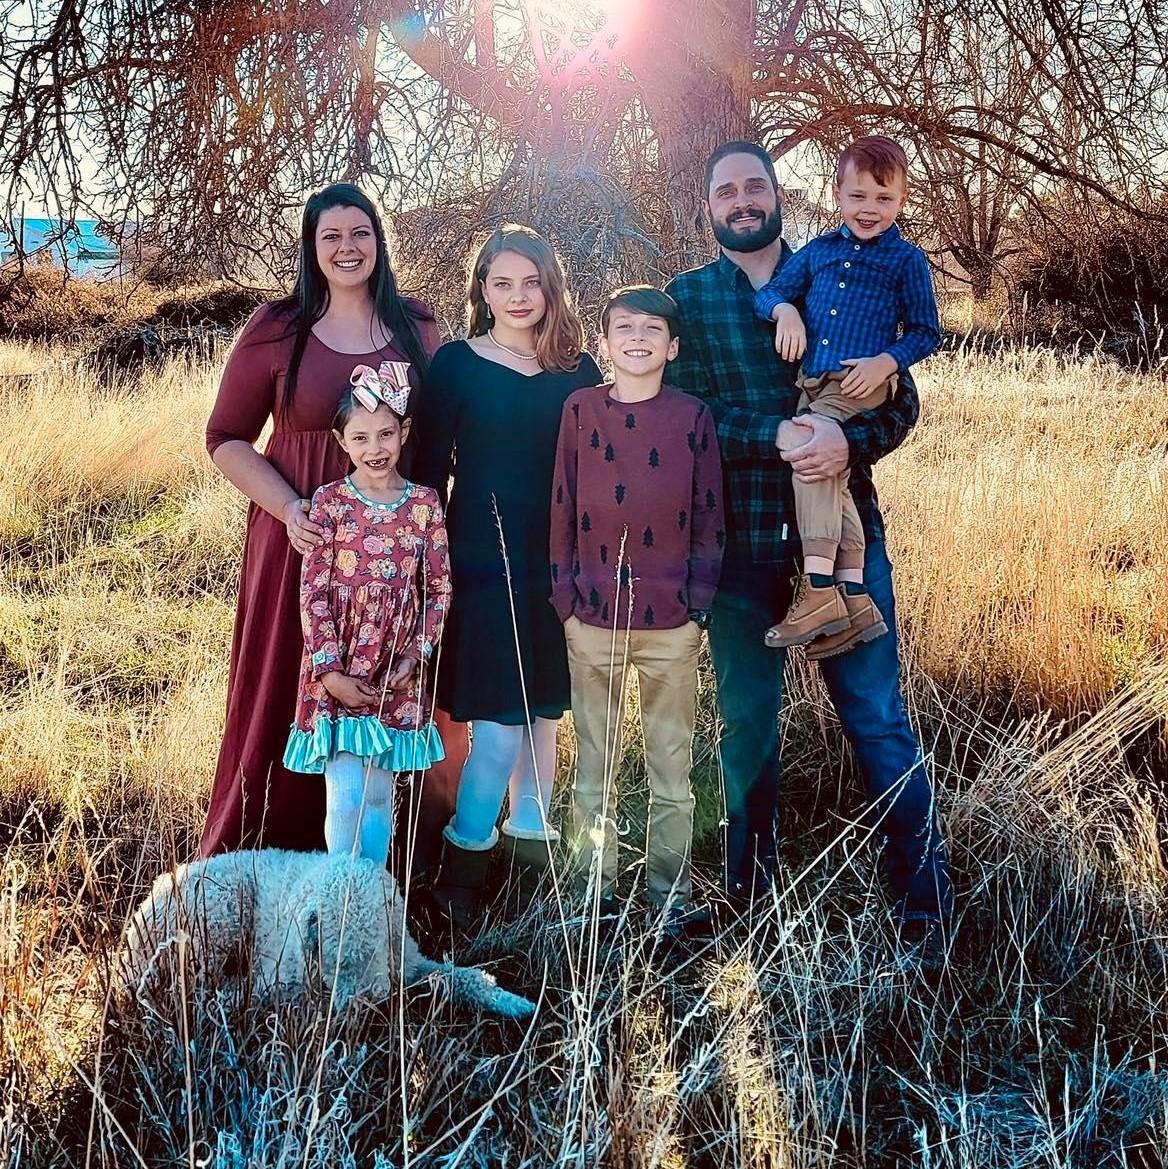 Kyle and Whitney with their four children. (Courtesy of <a href="https://www.facebook.com/Copeland.Family.Updates/">The Copeland Family Updates</a>)